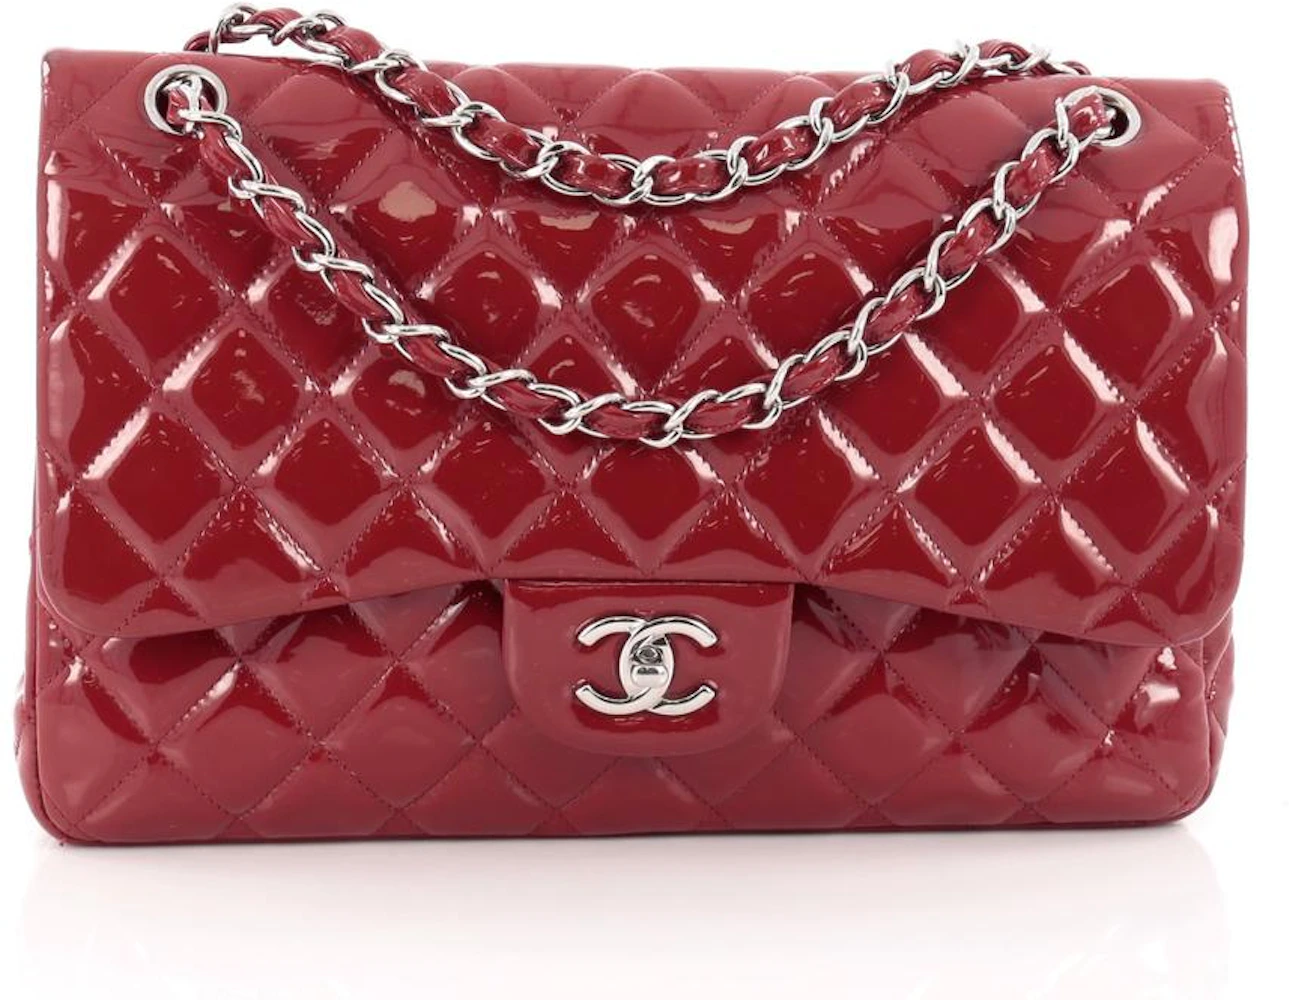 Chanel, Jumbo Classic double flap bag in fuchsia pink quilted patent leather  - Unique Designer Pieces